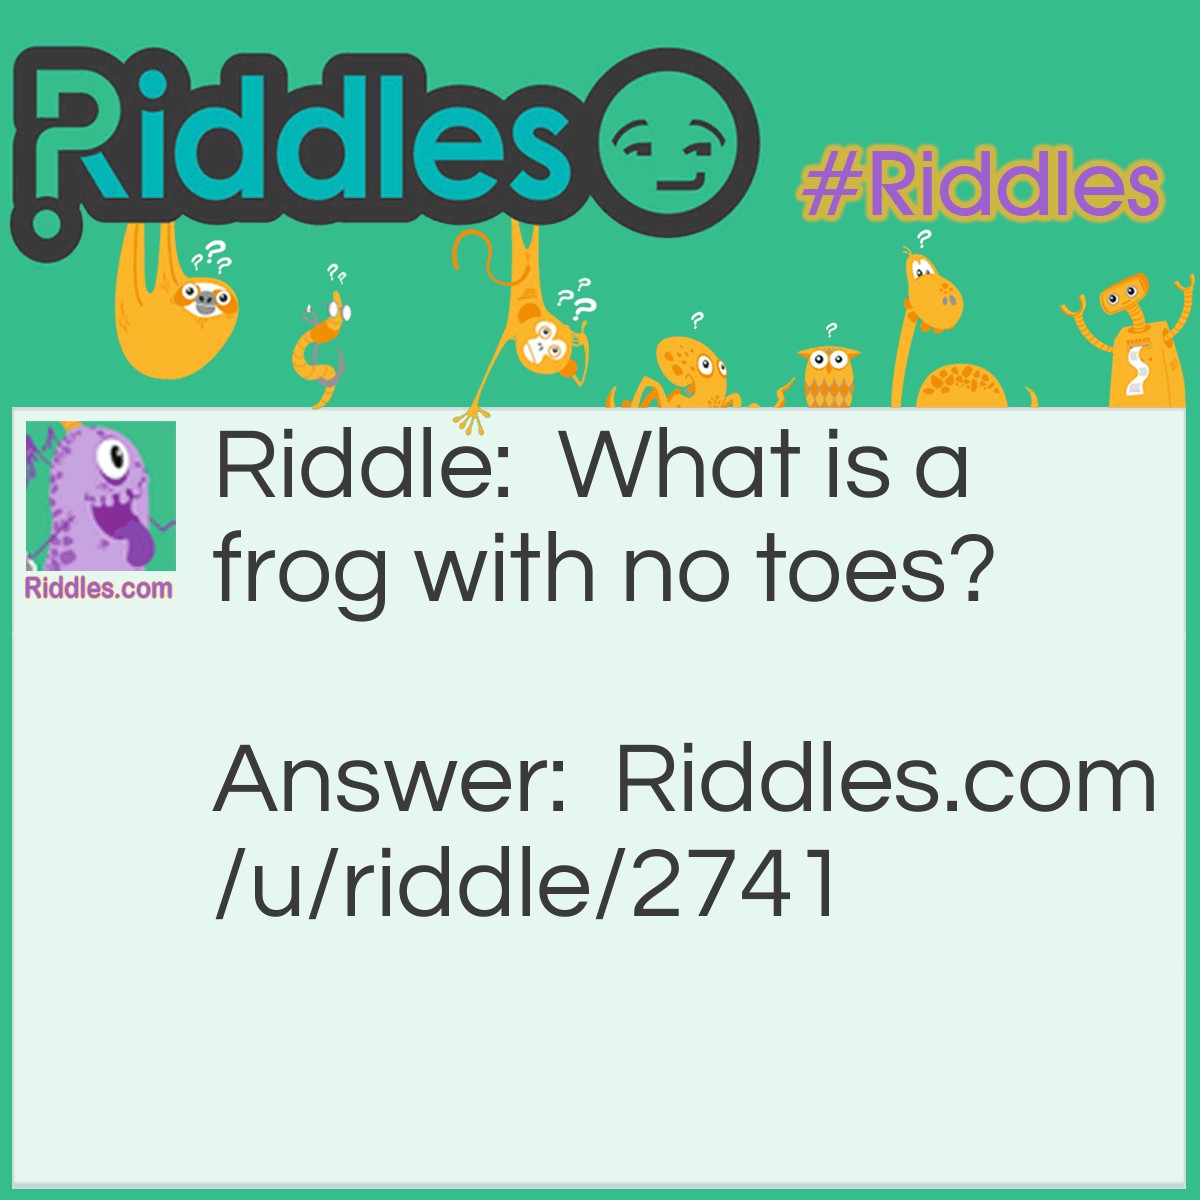 Riddle: What is a frog with no toes? Answer: It's no toed.